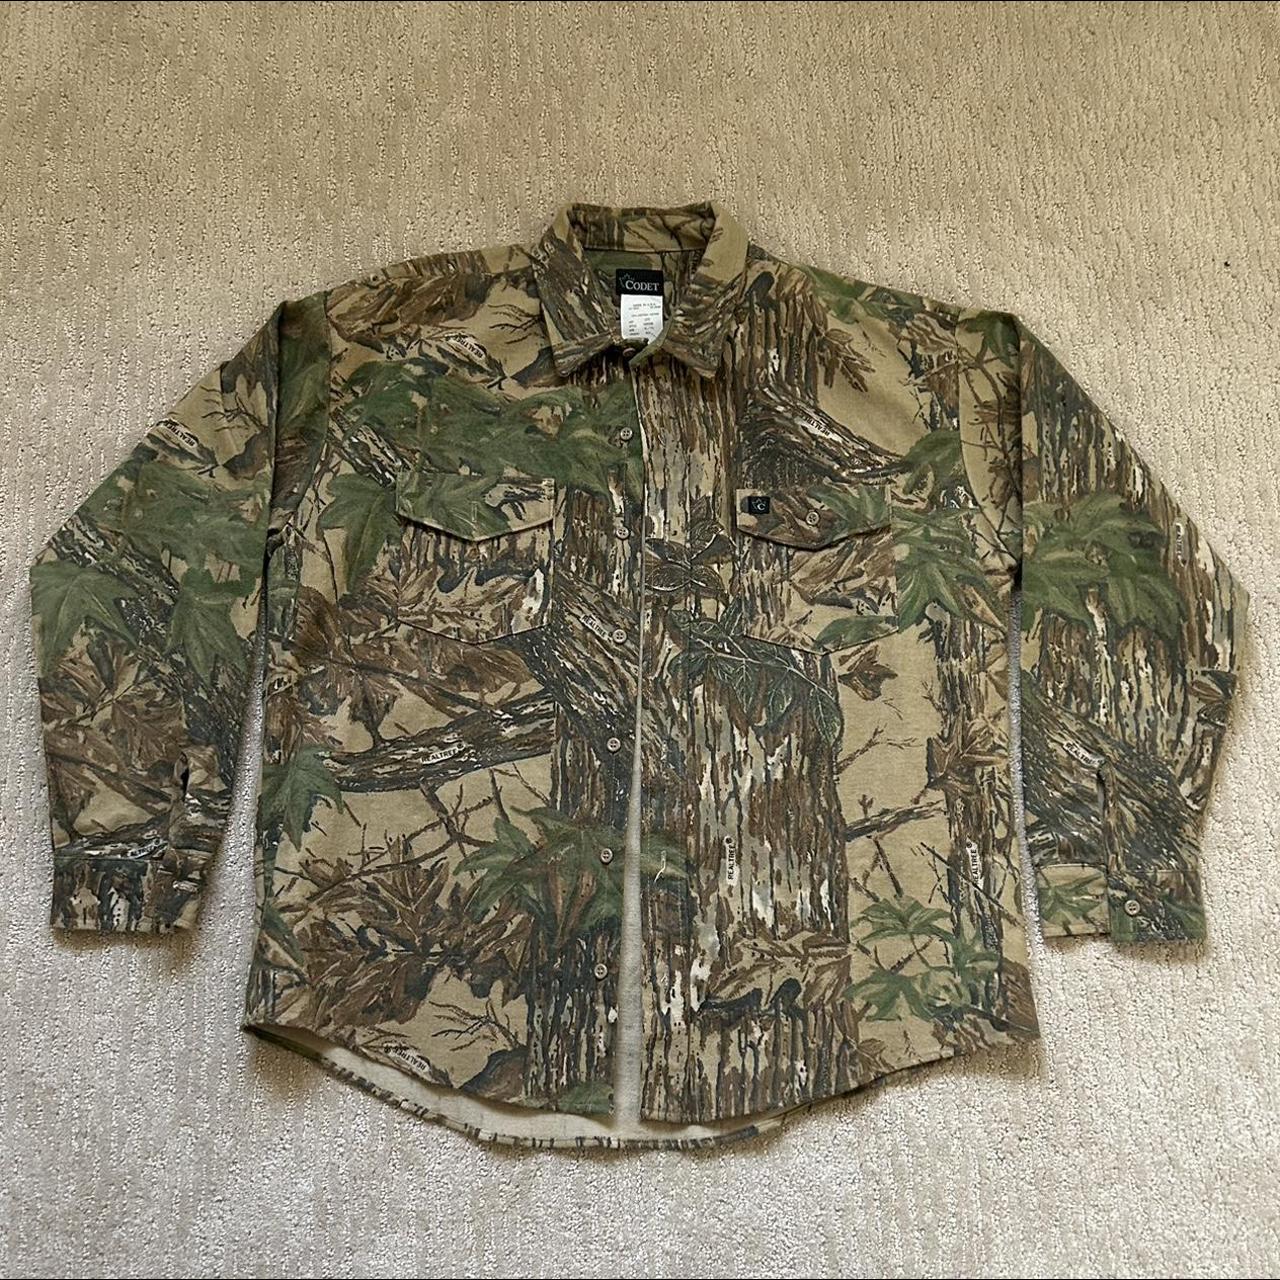 Vintage Tree Camo Button Up Shirt made by Rattlers. - Depop